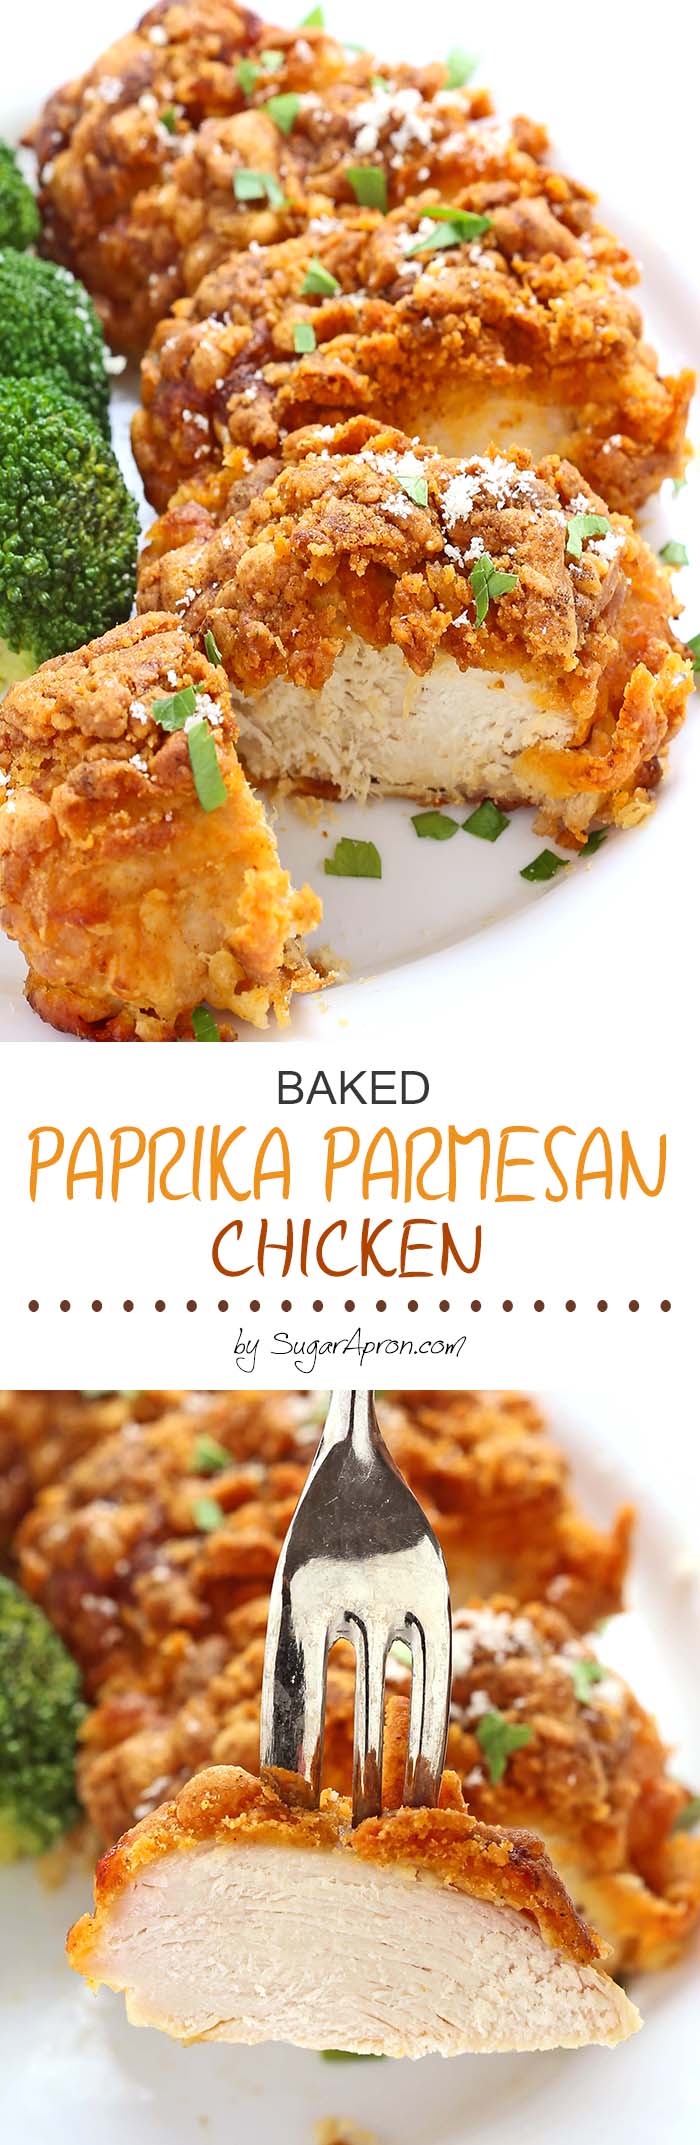 Baked Paprika Parmesan Chicken is one of those everyone-should-know-how-to-make recipes. It’s easy and comes together quickly. In fact, it’s hard to mess up!